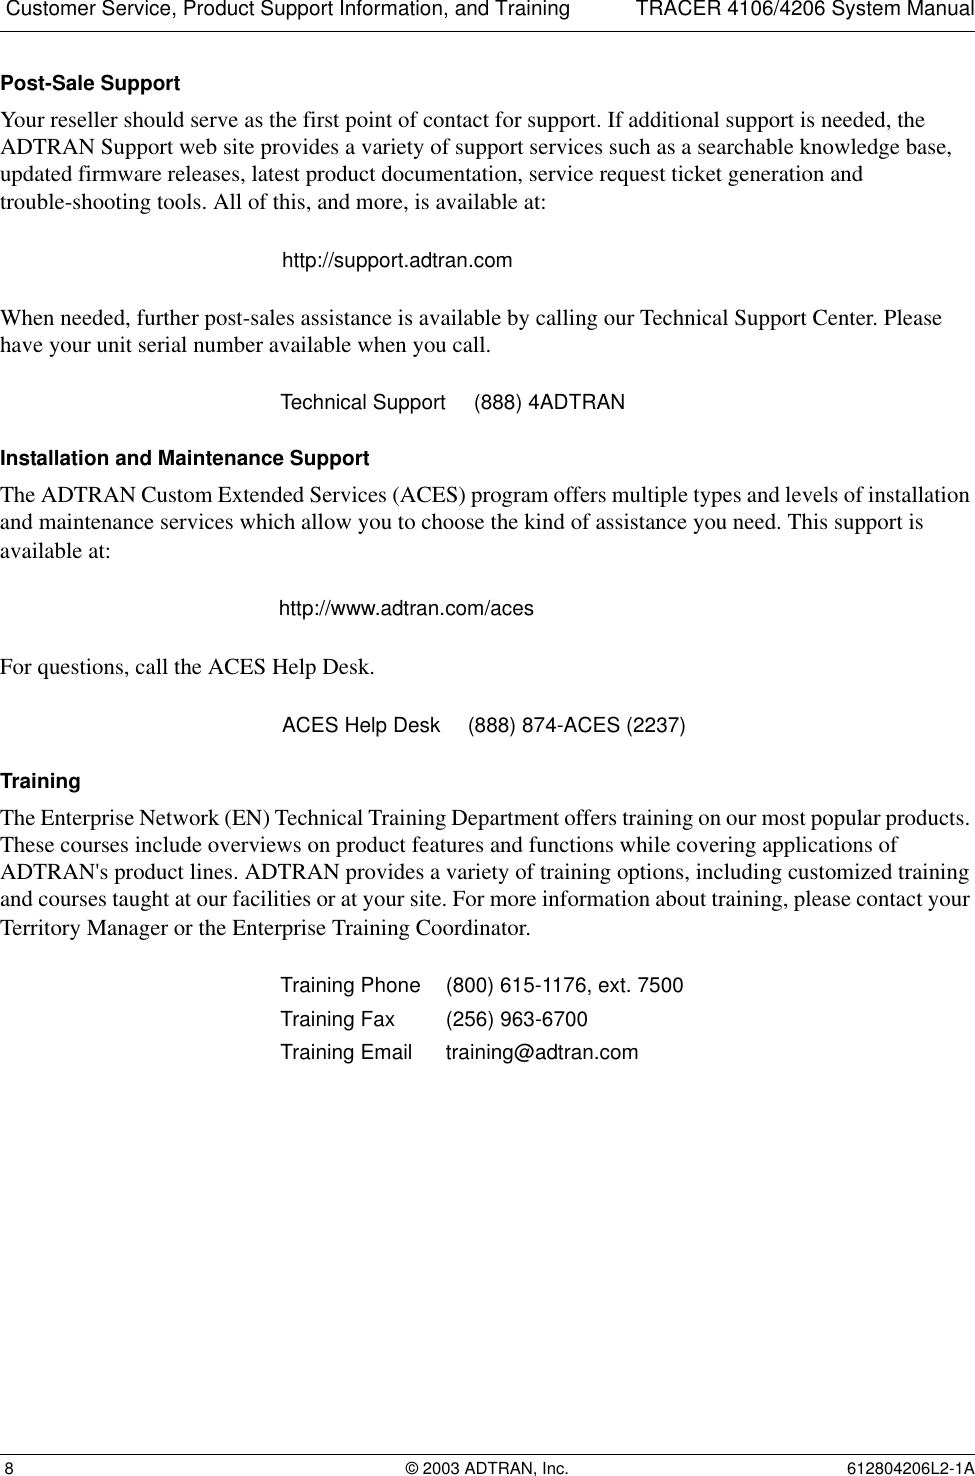  Customer Service, Product Support Information, and Training TRACER 4106/4206 System Manual 8 © 2003 ADTRAN, Inc. 612804206L2-1APost-Sale SupportYour reseller should serve as the first point of contact for support. If additional support is needed, the ADTRAN Support web site provides a variety of support services such as a searchable knowledge base, updated firmware releases, latest product documentation, service request ticket generation and trouble-shooting tools. All of this, and more, is available at:When needed, further post-sales assistance is available by calling our Technical Support Center. Please have your unit serial number available when you call.Installation and Maintenance SupportThe ADTRAN Custom Extended Services (ACES) program offers multiple types and levels of installation and maintenance services which allow you to choose the kind of assistance you need. This support is available at:For questions, call the ACES Help Desk. TrainingThe Enterprise Network (EN) Technical Training Department offers training on our most popular products. These courses include overviews on product features and functions while covering applications of ADTRAN&apos;s product lines. ADTRAN provides a variety of training options, including customized training and courses taught at our facilities or at your site. For more information about training, please contact your Territory Manager or the Enterprise Training Coordinator.http://support.adtran.comTechnical Support (888) 4ADTRANhttp://www.adtran.com/acesACES Help Desk (888) 874-ACES (2237) Training Phone (800) 615-1176, ext. 7500 Training Fax (256) 963-6700Training Email training@adtran.com